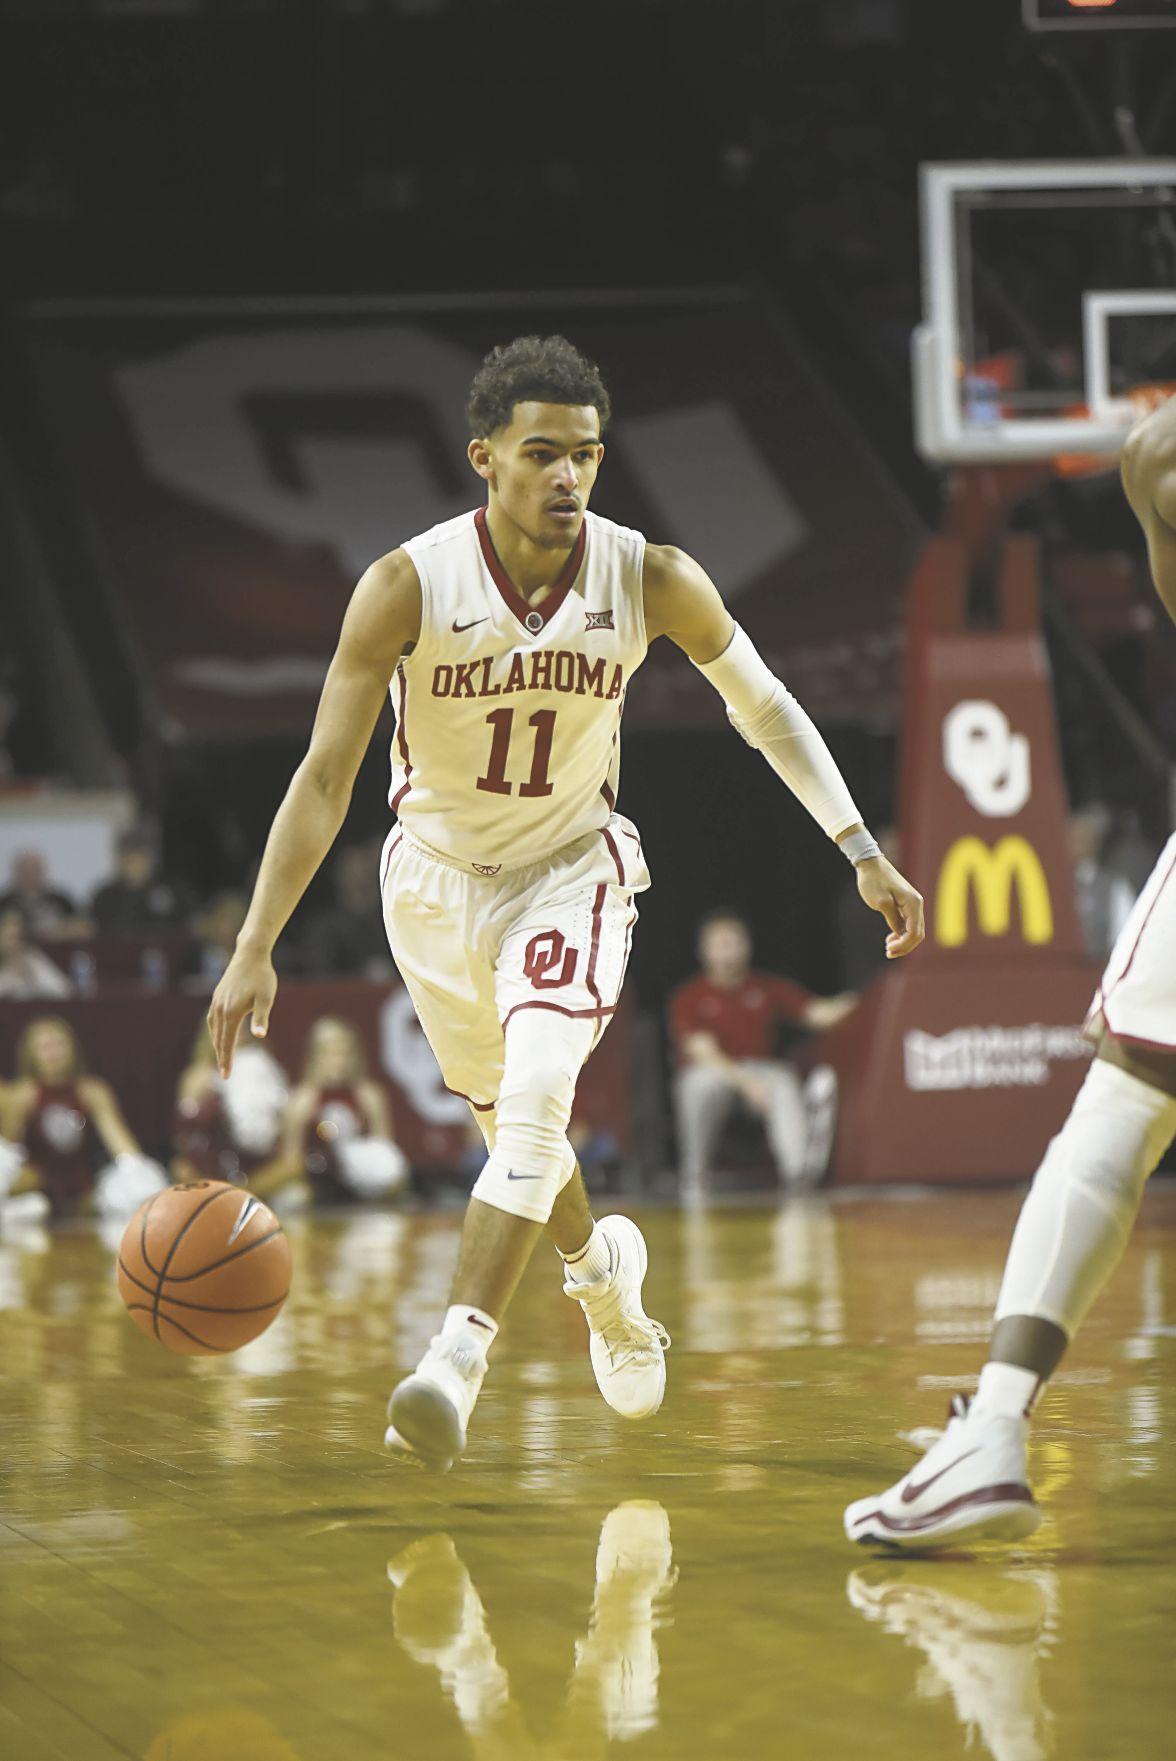 Trae Young breaks Big 12 scoring record in loss to Baylor. Sports